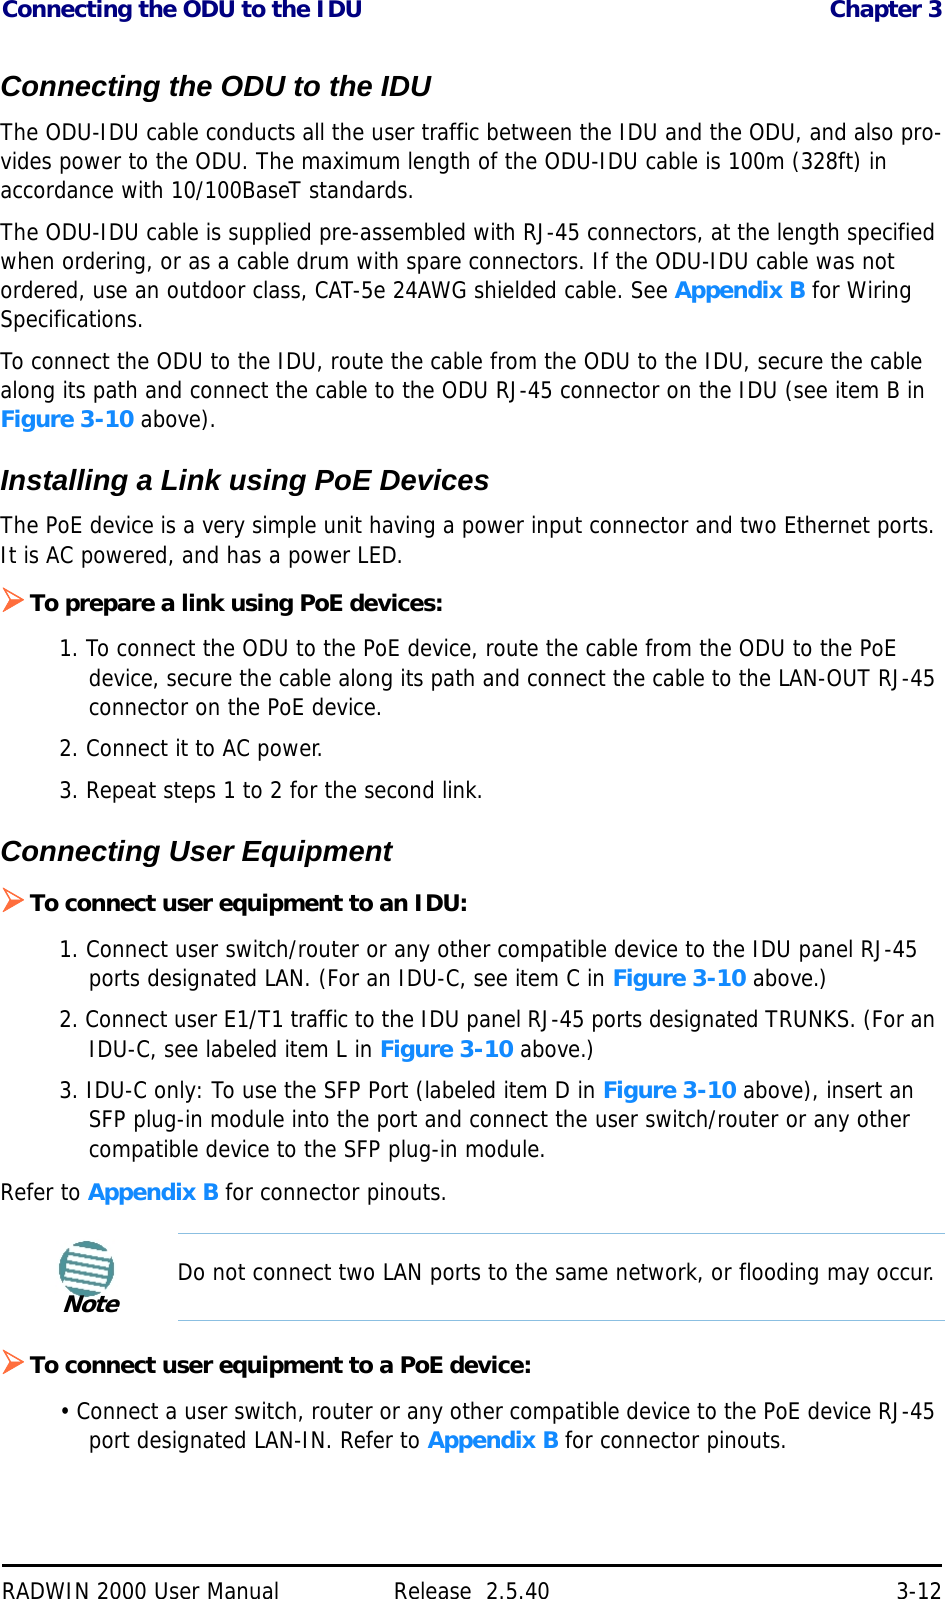 Connecting the ODU to the IDU Chapter 3RADWIN 2000 User Manual Release  2.5.40 3-12Connecting the ODU to the IDUThe ODU-IDU cable conducts all the user traffic between the IDU and the ODU, and also pro-vides power to the ODU. The maximum length of the ODU-IDU cable is 100m (328ft) in accordance with 10/100BaseT standards.The ODU-IDU cable is supplied pre-assembled with RJ-45 connectors, at the length specified when ordering, or as a cable drum with spare connectors. If the ODU-IDU cable was not ordered, use an outdoor class, CAT-5e 24AWG shielded cable. See Appendix B for Wiring Specifications.To connect the ODU to the IDU, route the cable from the ODU to the IDU, secure the cable along its path and connect the cable to the ODU RJ-45 connector on the IDU (see item B in Figure 3-10 above).Installing a Link using PoE DevicesThe PoE device is a very simple unit having a power input connector and two Ethernet ports. It is AC powered, and has a power LED.To prepare a link using PoE devices:1. To connect the ODU to the PoE device, route the cable from the ODU to the PoE device, secure the cable along its path and connect the cable to the LAN-OUT RJ-45 connector on the PoE device.2. Connect it to AC power.3. Repeat steps 1 to 2 for the second link.Connecting User EquipmentTo connect user equipment to an IDU:1. Connect user switch/router or any other compatible device to the IDU panel RJ-45 ports designated LAN. (For an IDU-C, see item C in Figure 3-10 above.)2. Connect user E1/T1 traffic to the IDU panel RJ-45 ports designated TRUNKS. (For an IDU-C, see labeled item L in Figure 3-10 above.)3. IDU-C only: To use the SFP Port (labeled item D in Figure 3-10 above), insert an SFP plug-in module into the port and connect the user switch/router or any other compatible device to the SFP plug-in module.Refer to Appendix B for connector pinouts.To connect user equipment to a PoE device:• Connect a user switch, router or any other compatible device to the PoE device RJ-45 port designated LAN-IN. Refer to Appendix B for connector pinouts.NoteDo not connect two LAN ports to the same network, or flooding may occur.